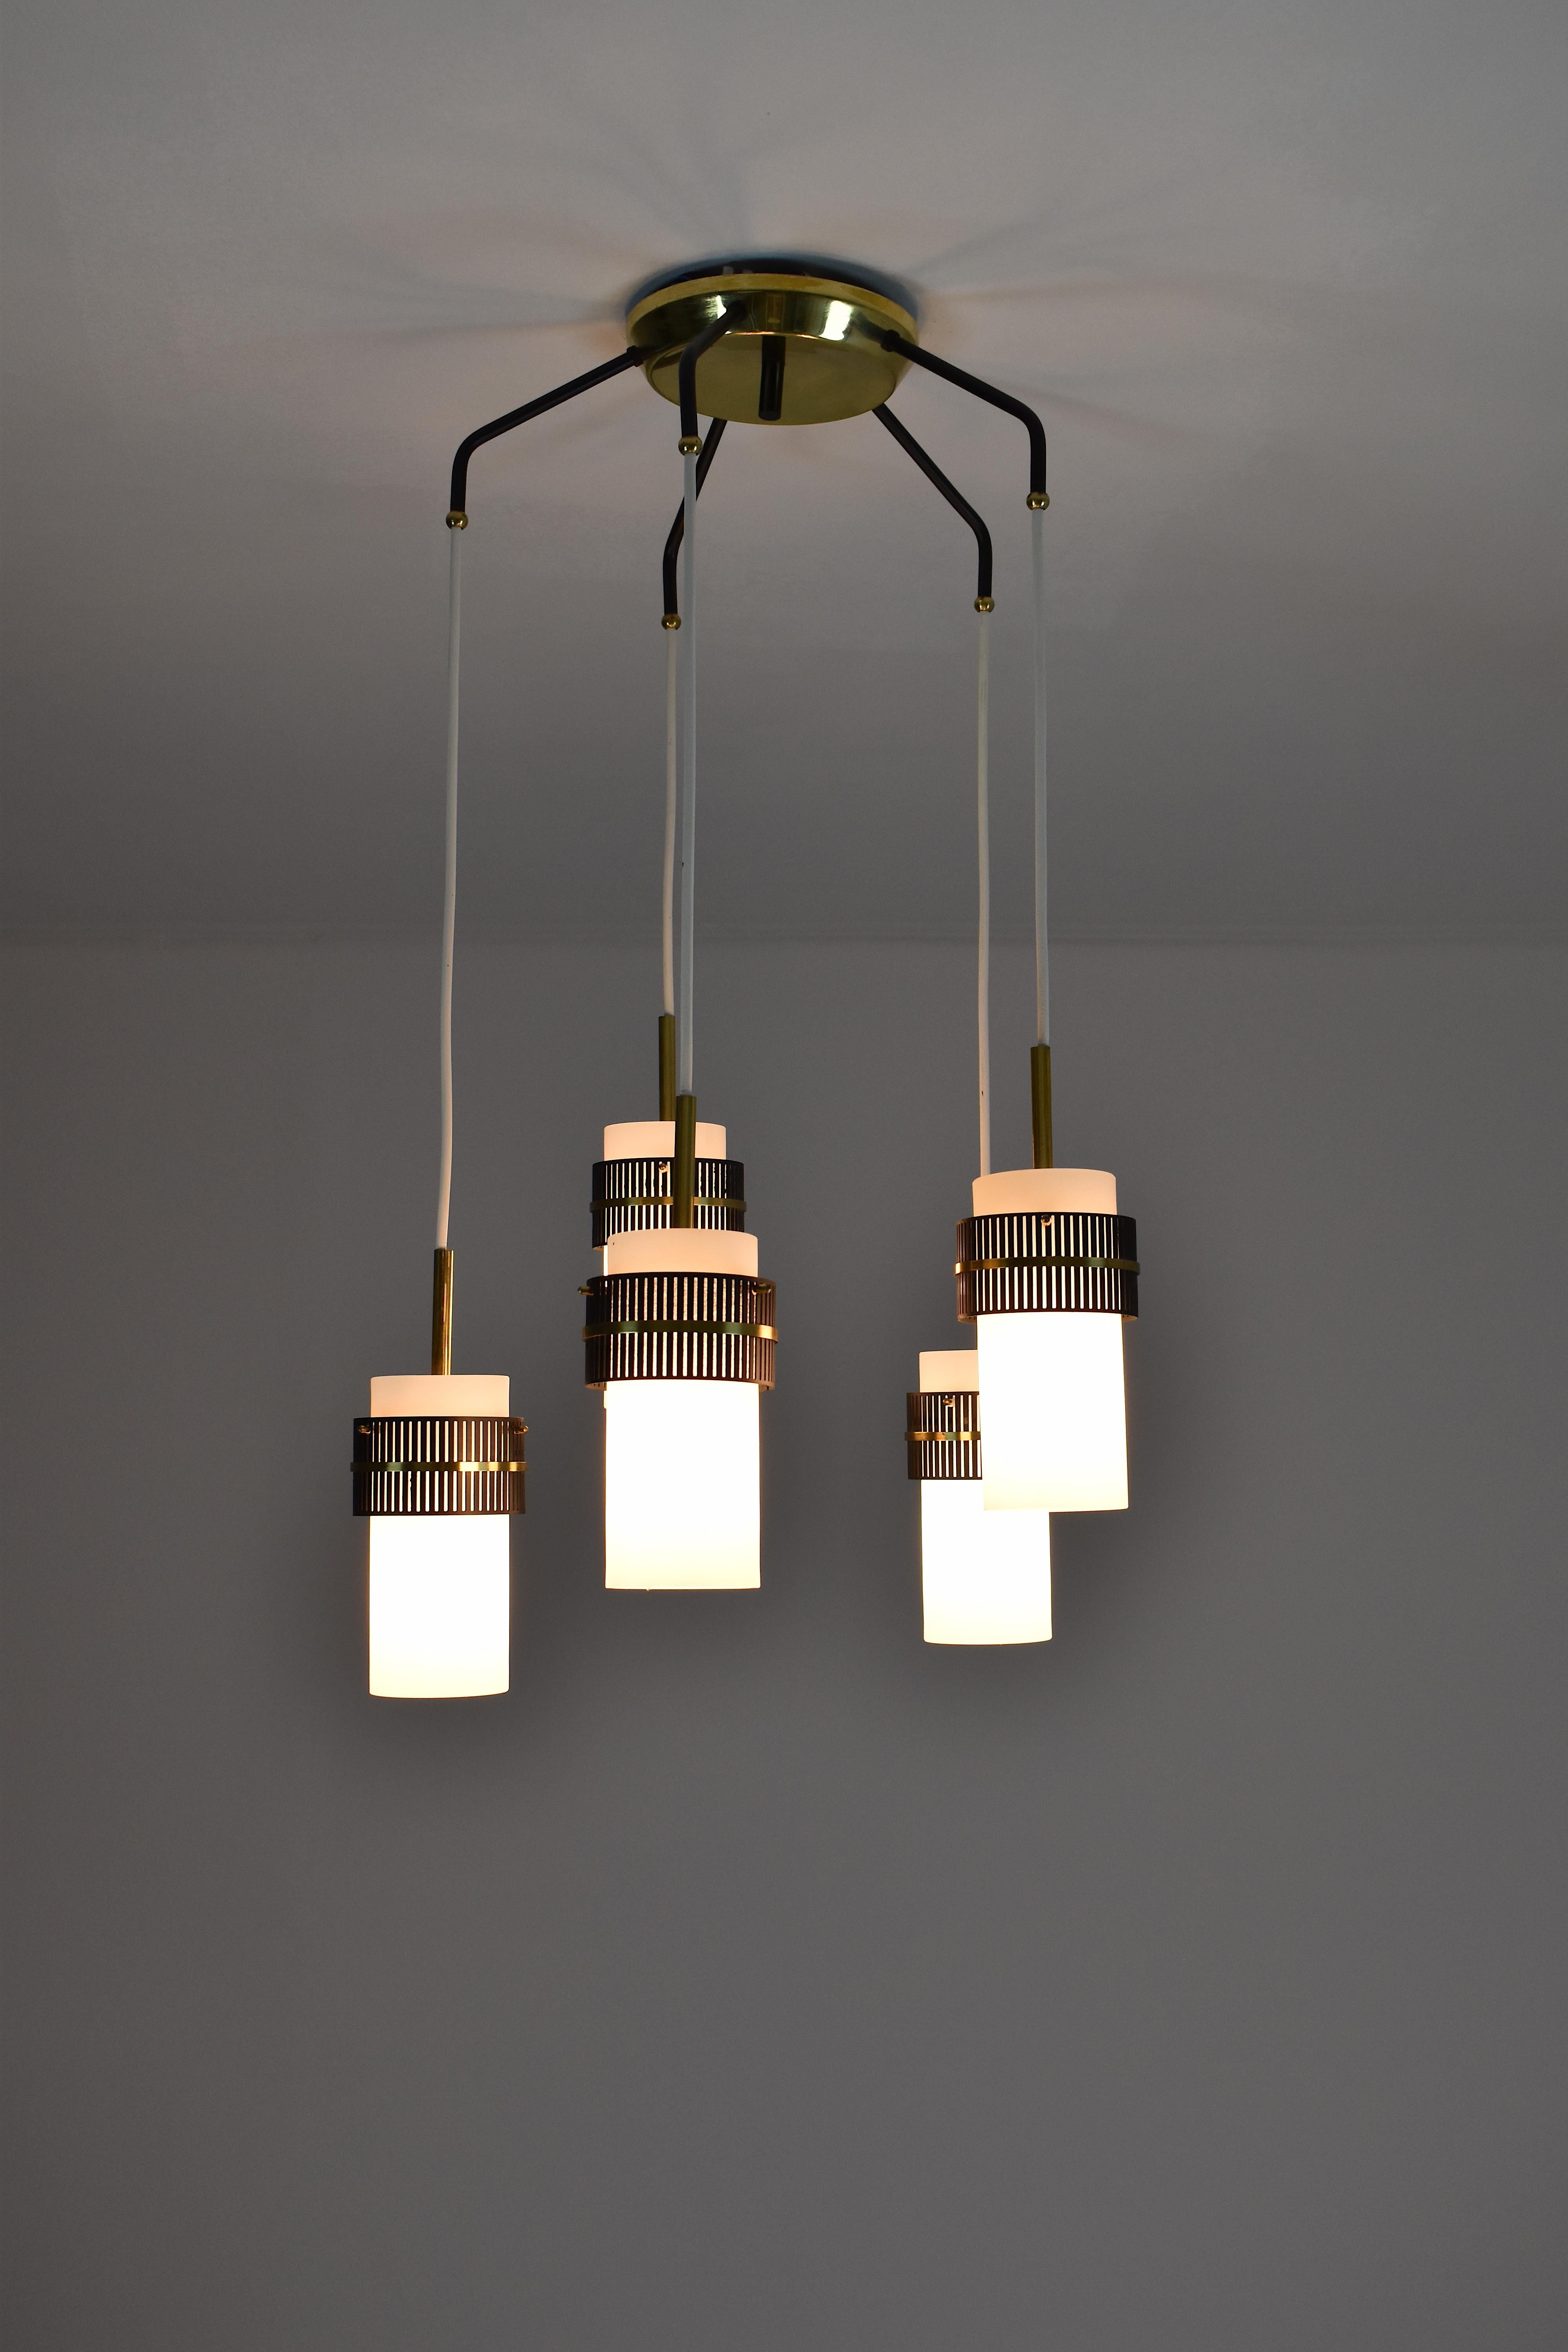 An elegant 20th-century vintage chandelier or pendant from the 1950s in the style of Stilnovo. This statement piece is composed of 5 lights designed with opaline glass shades complimented by stunning brass and metal black perforated details that